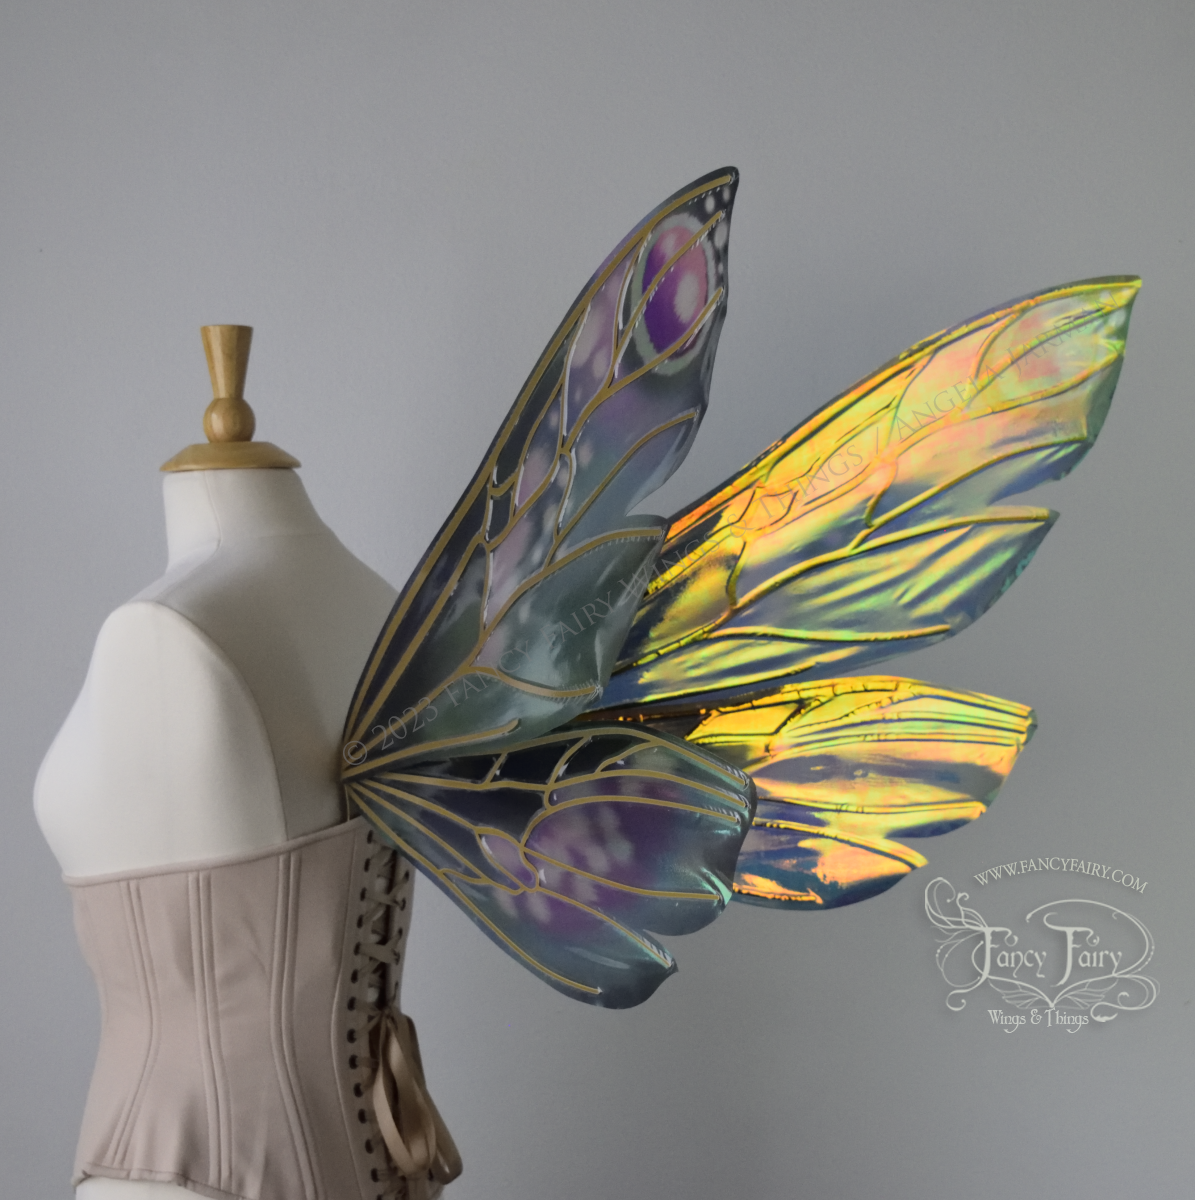 Back 3/4 view of extra large iridescent fairy wings in various shades of green, teal, blue, lavender with touches of pink, with gold veins, worn on a dress form with underbust corset